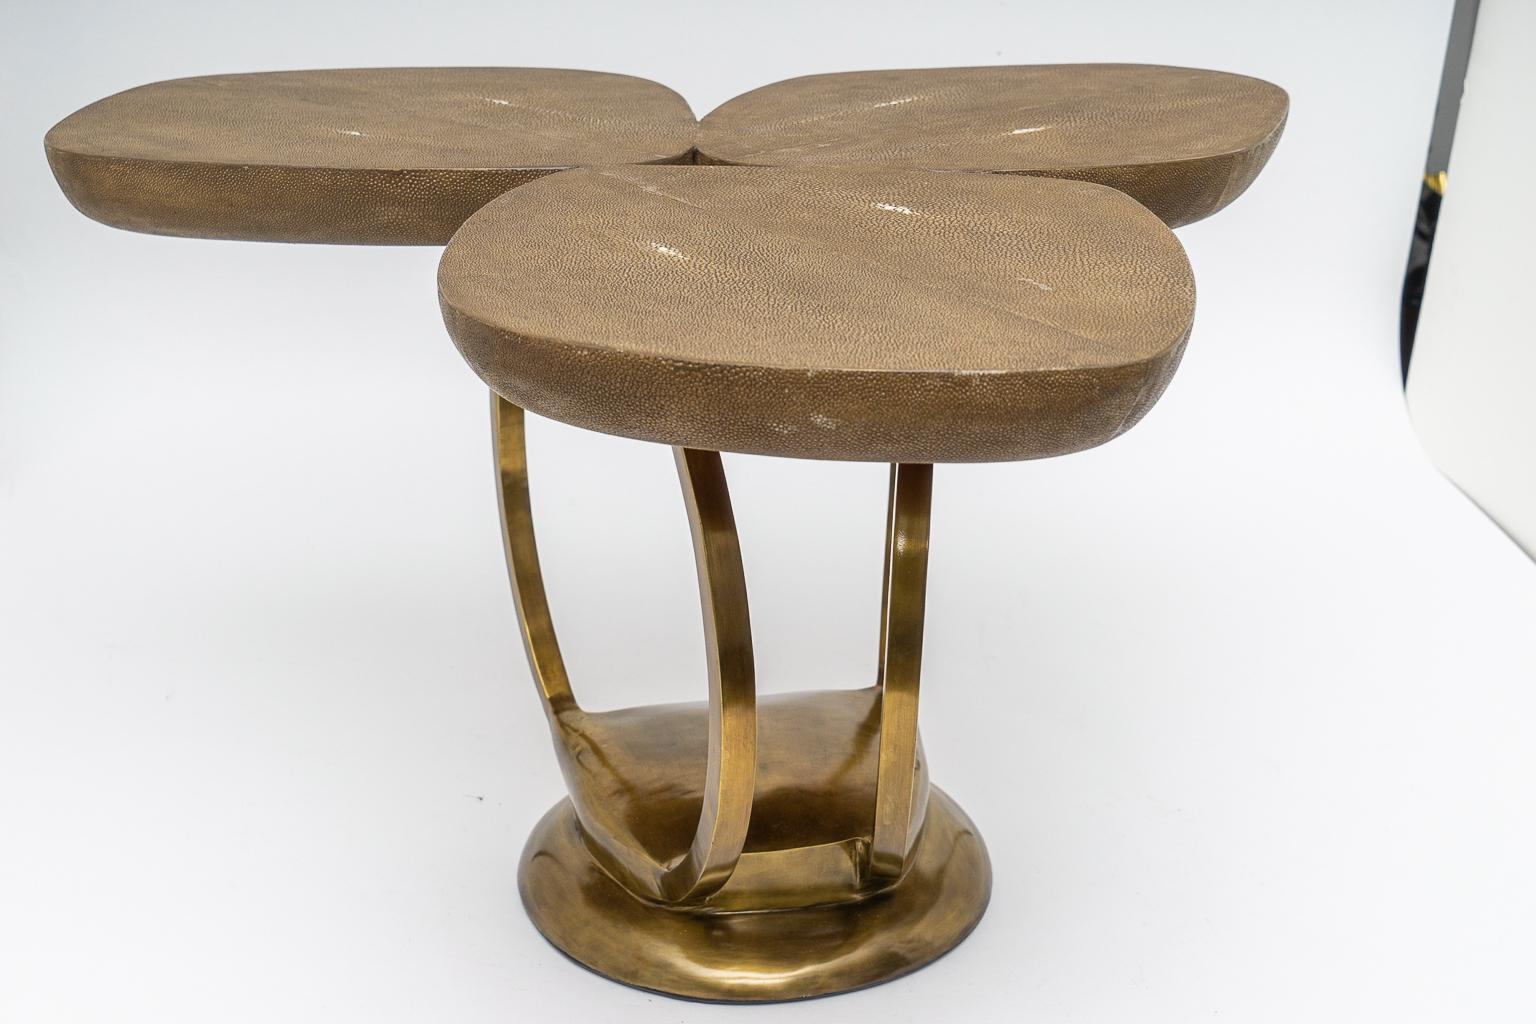 Hand-Crafted Shagreen and Brass Cocktail Table